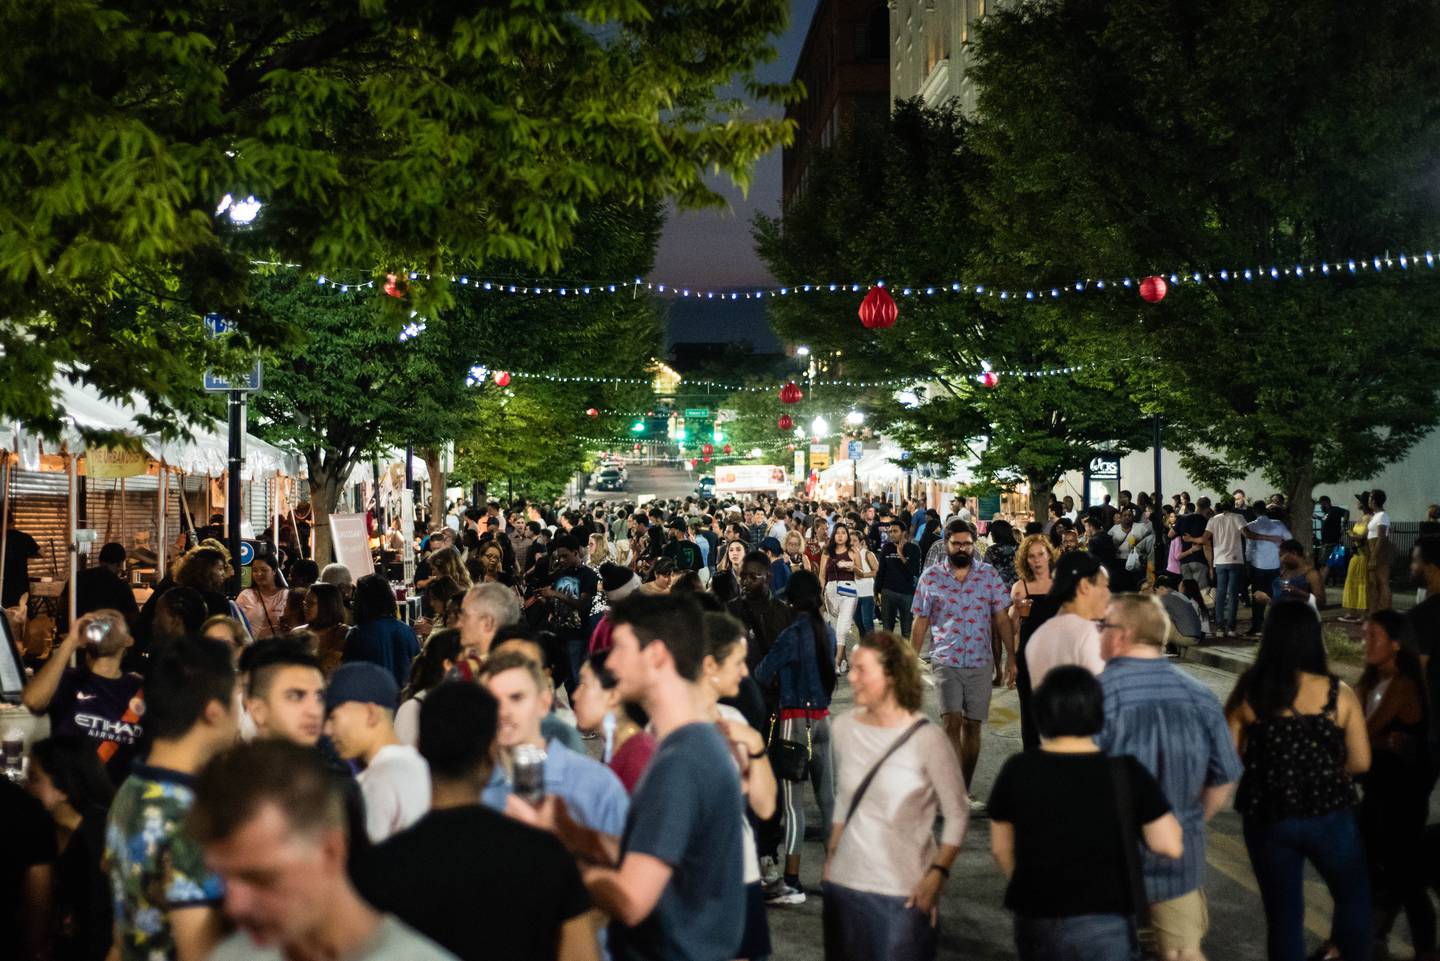 Festive red lanterns hang above a crowded street lined with tents full of food vendors at the 2019 Charm City Night Market.